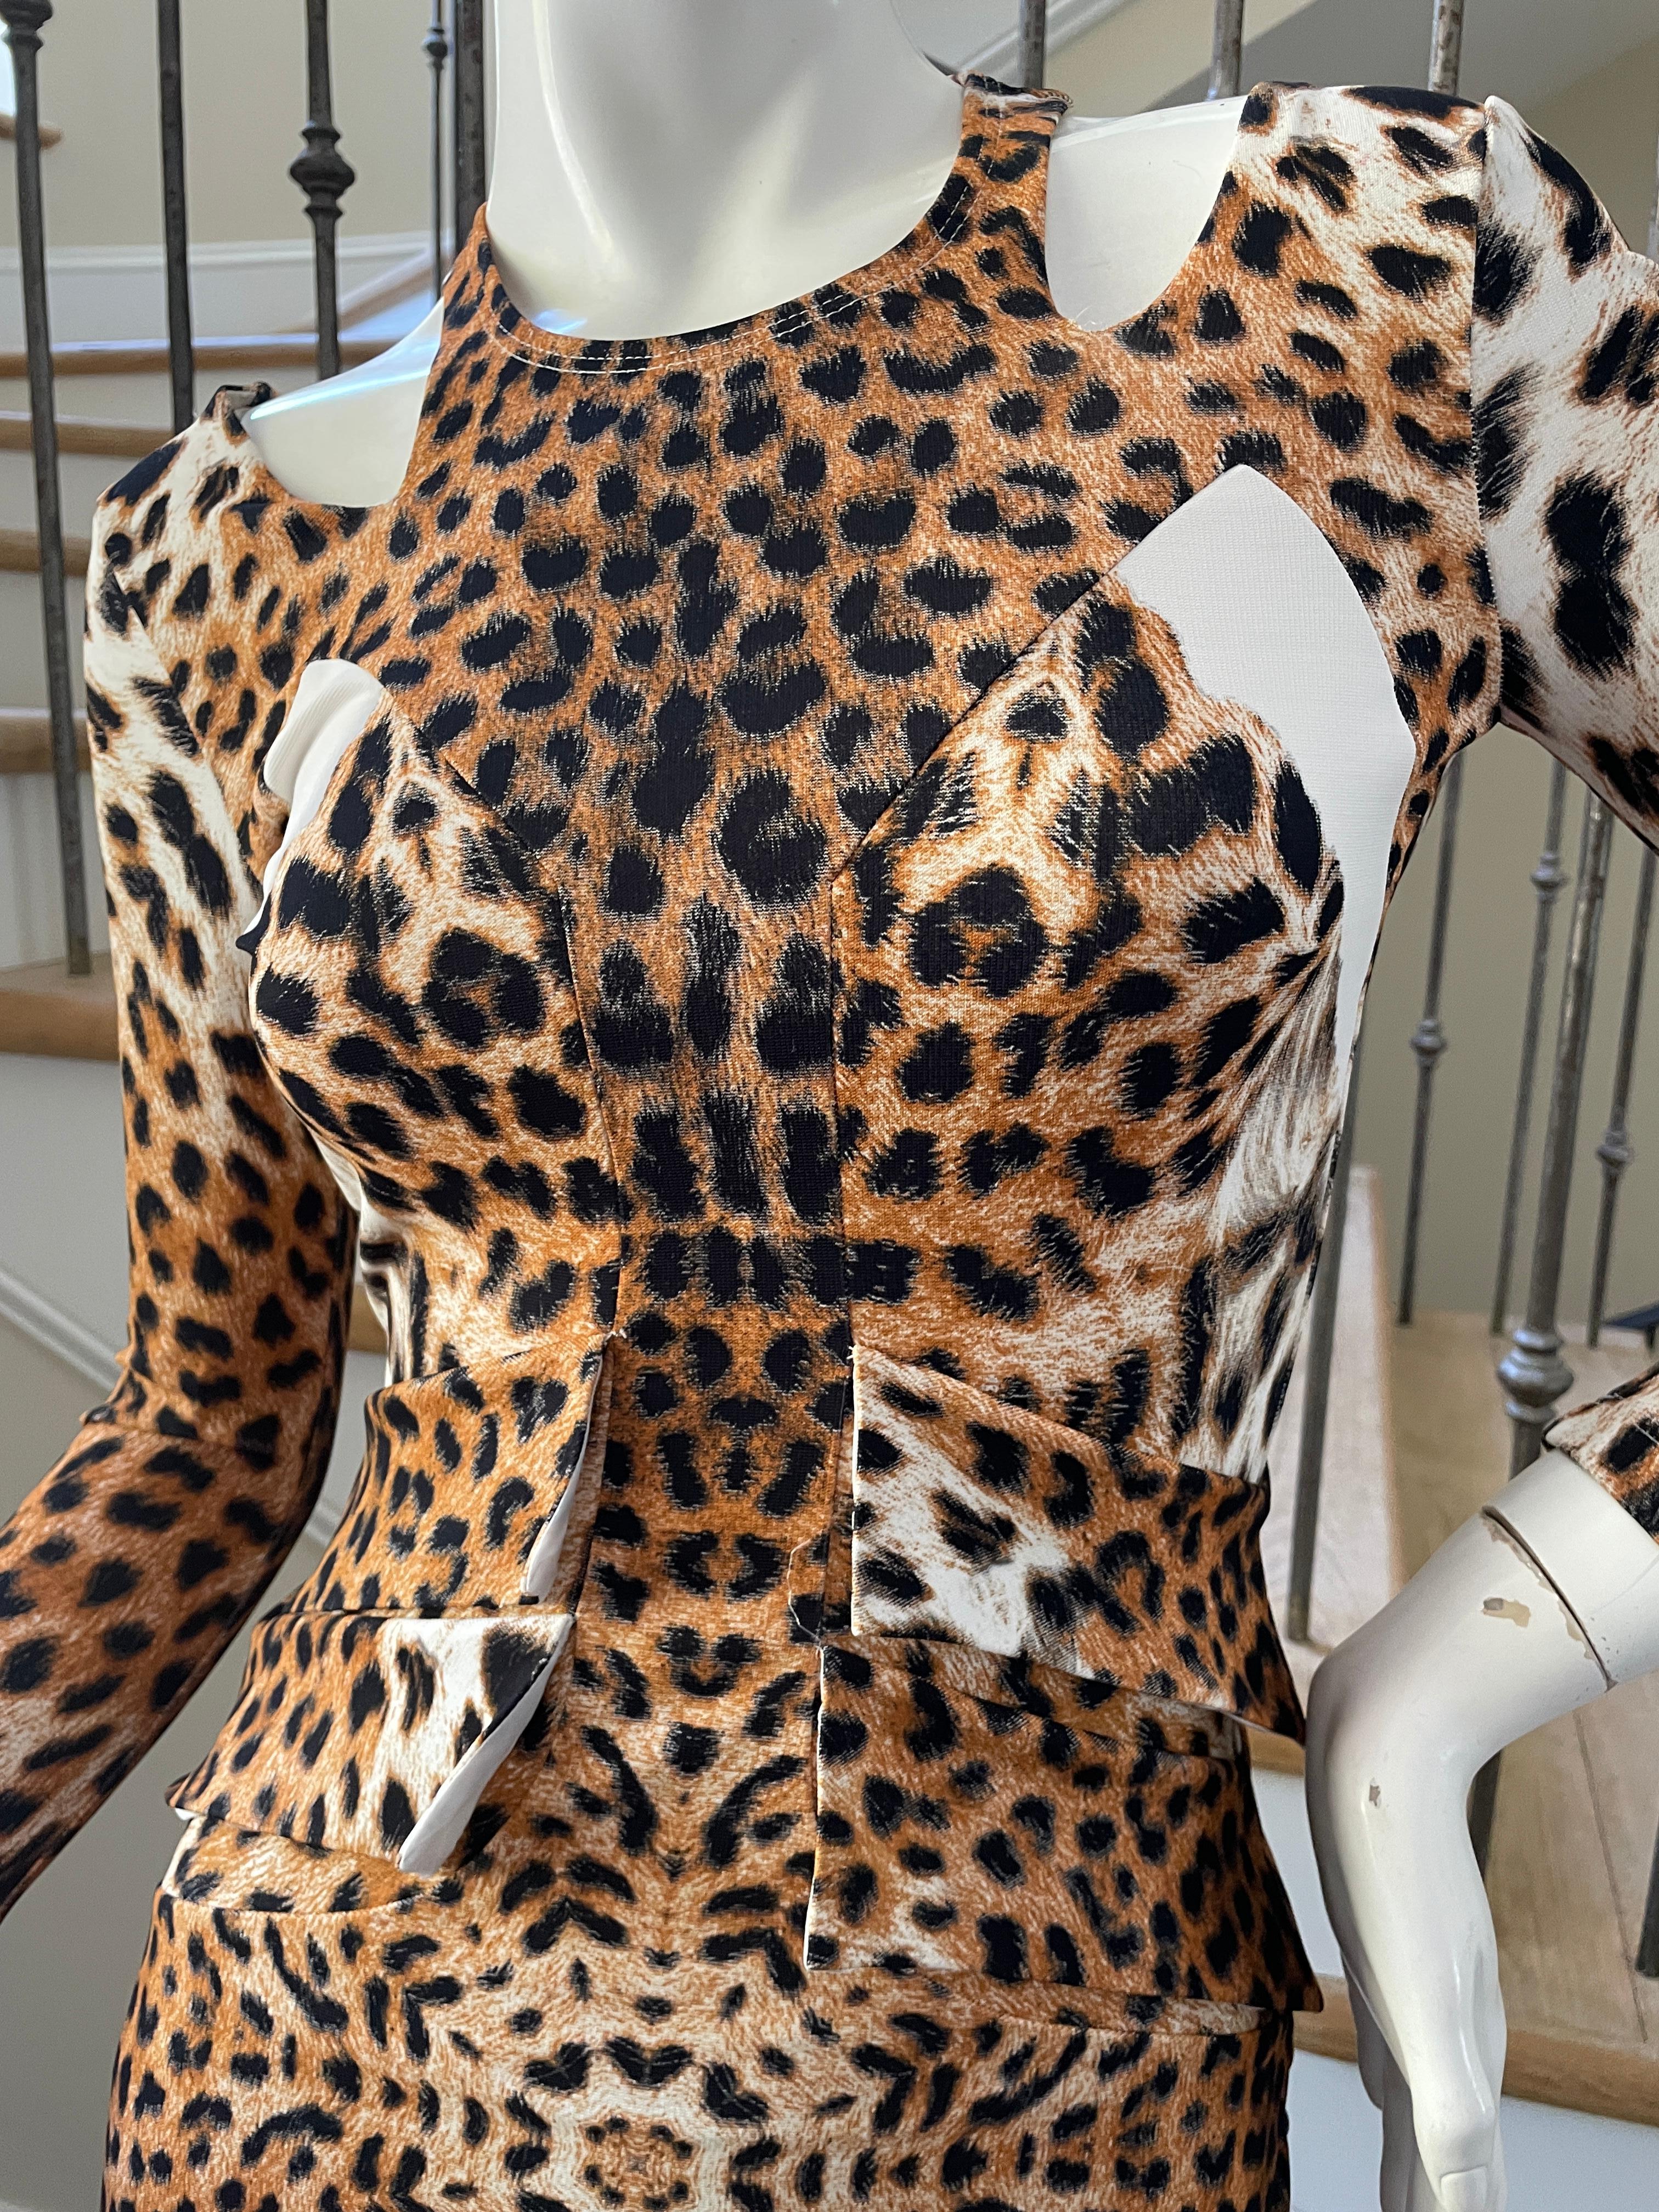 Just Cavalli Vintage Leopard Print Cut Out Mini Dress by Roberto Cavalli  In Excellent Condition For Sale In Cloverdale, CA